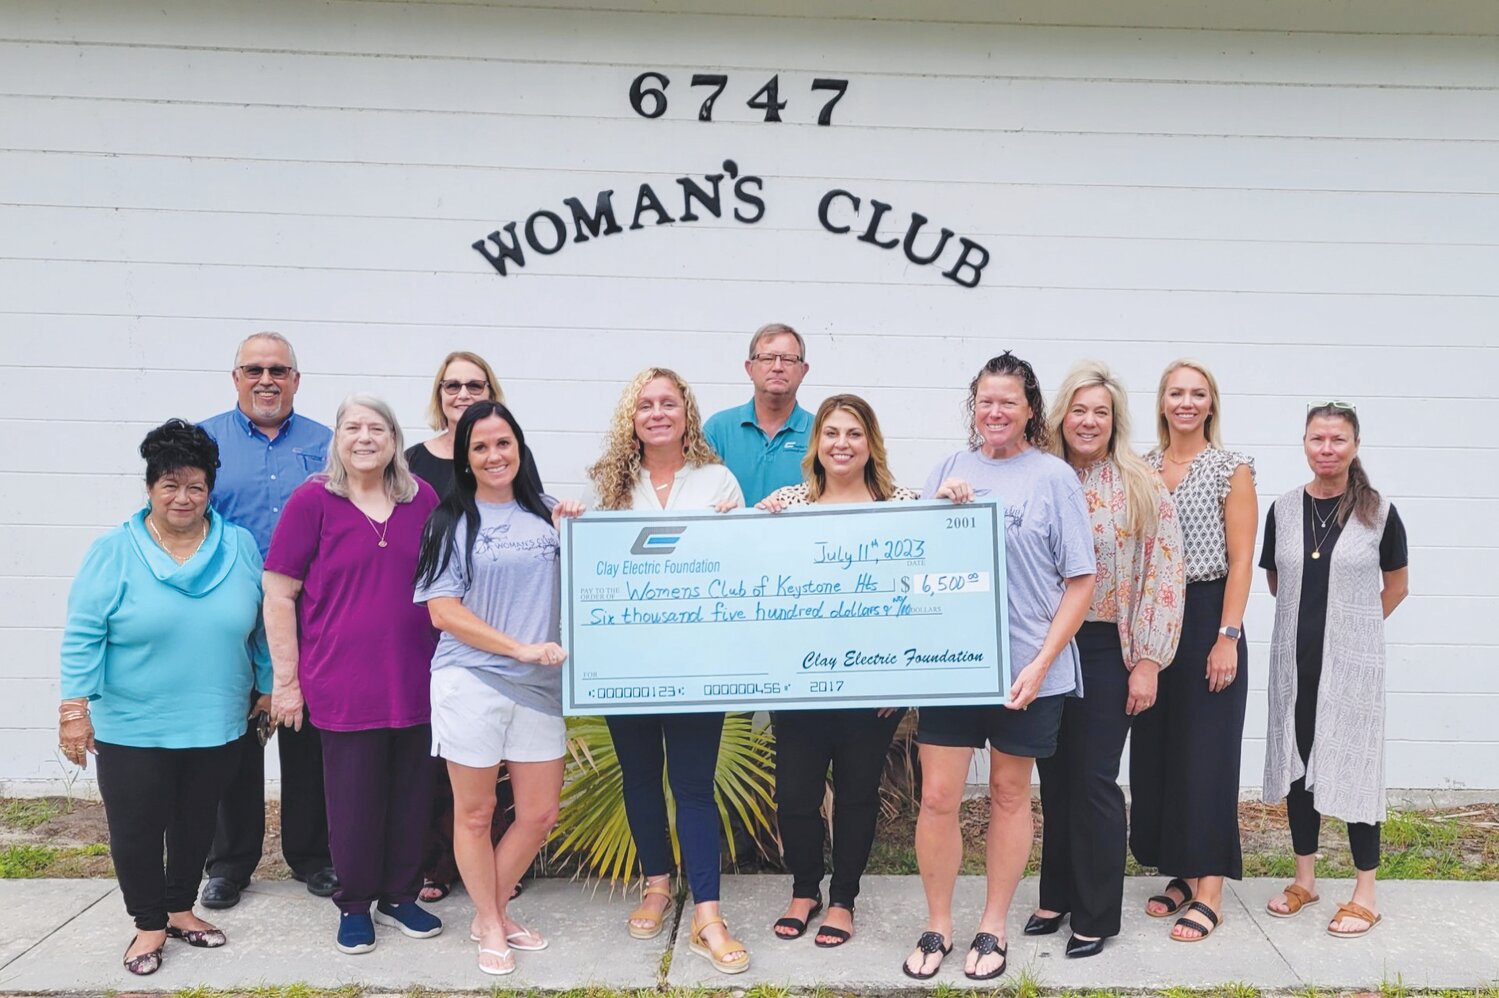 From left, Junior Woman’s Club members Maria Walker, Tina Bullock, Tori Hersey, Amy Webber, Brooklyn Hayes-Yelin, Dana Eatmon, Cindy Loose, Kim Dyal and Karan Lake were thrilled to get the donation from Clay Electric.